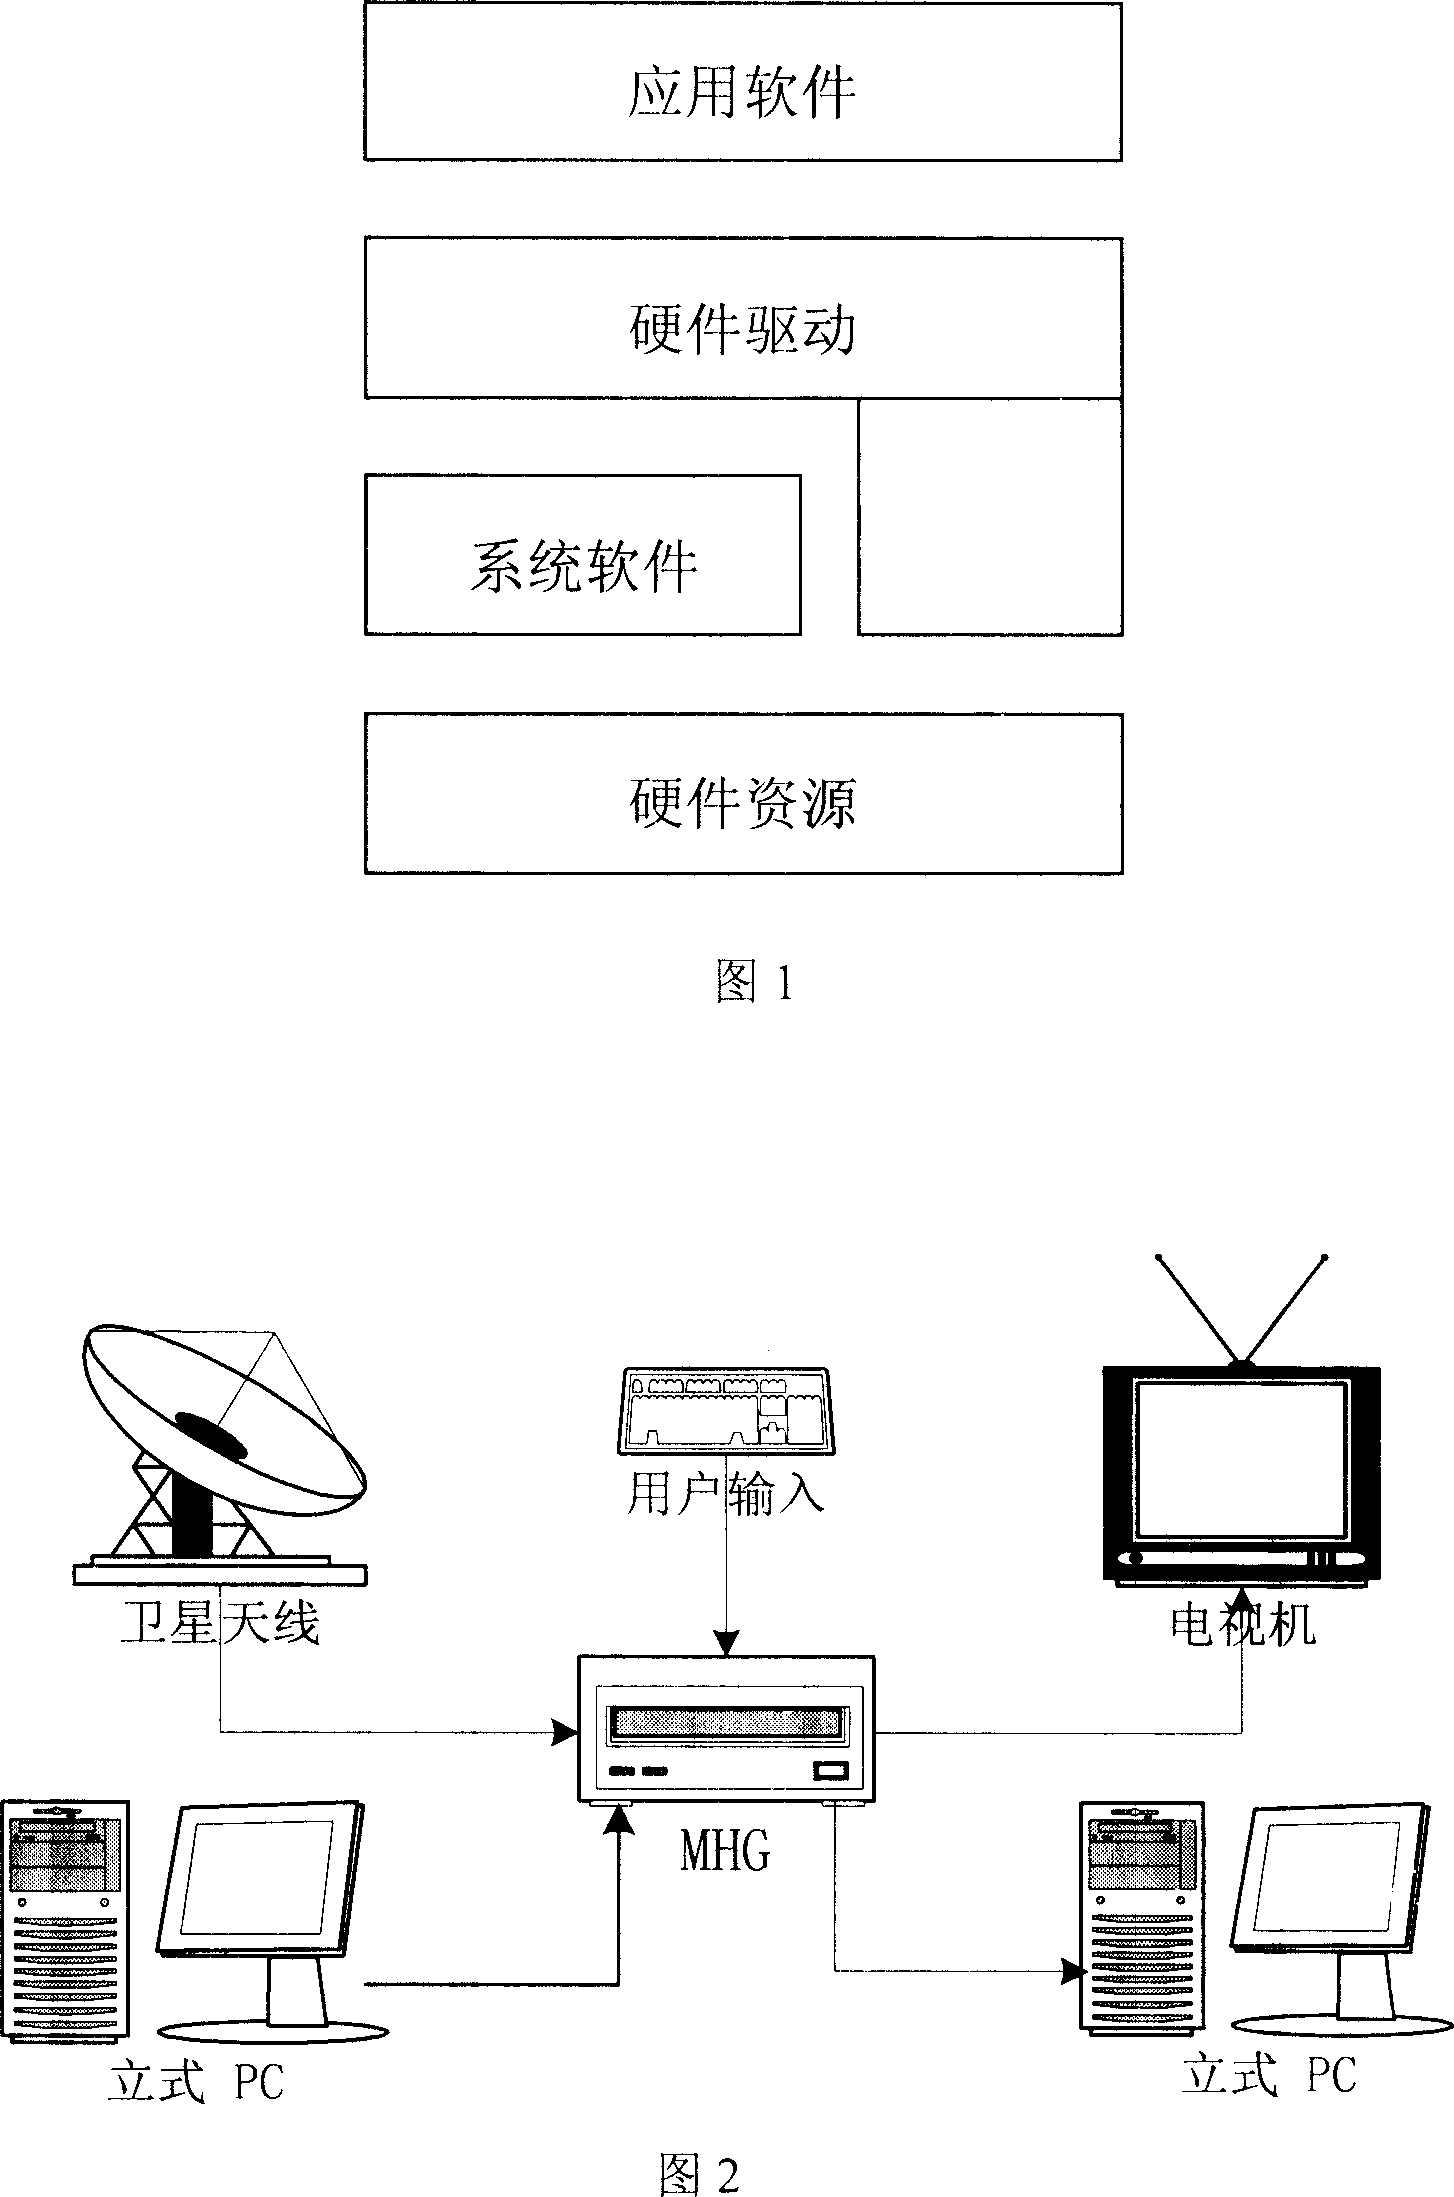 Multimedia home gateway and its implementation method for program recording, recovery, suspension